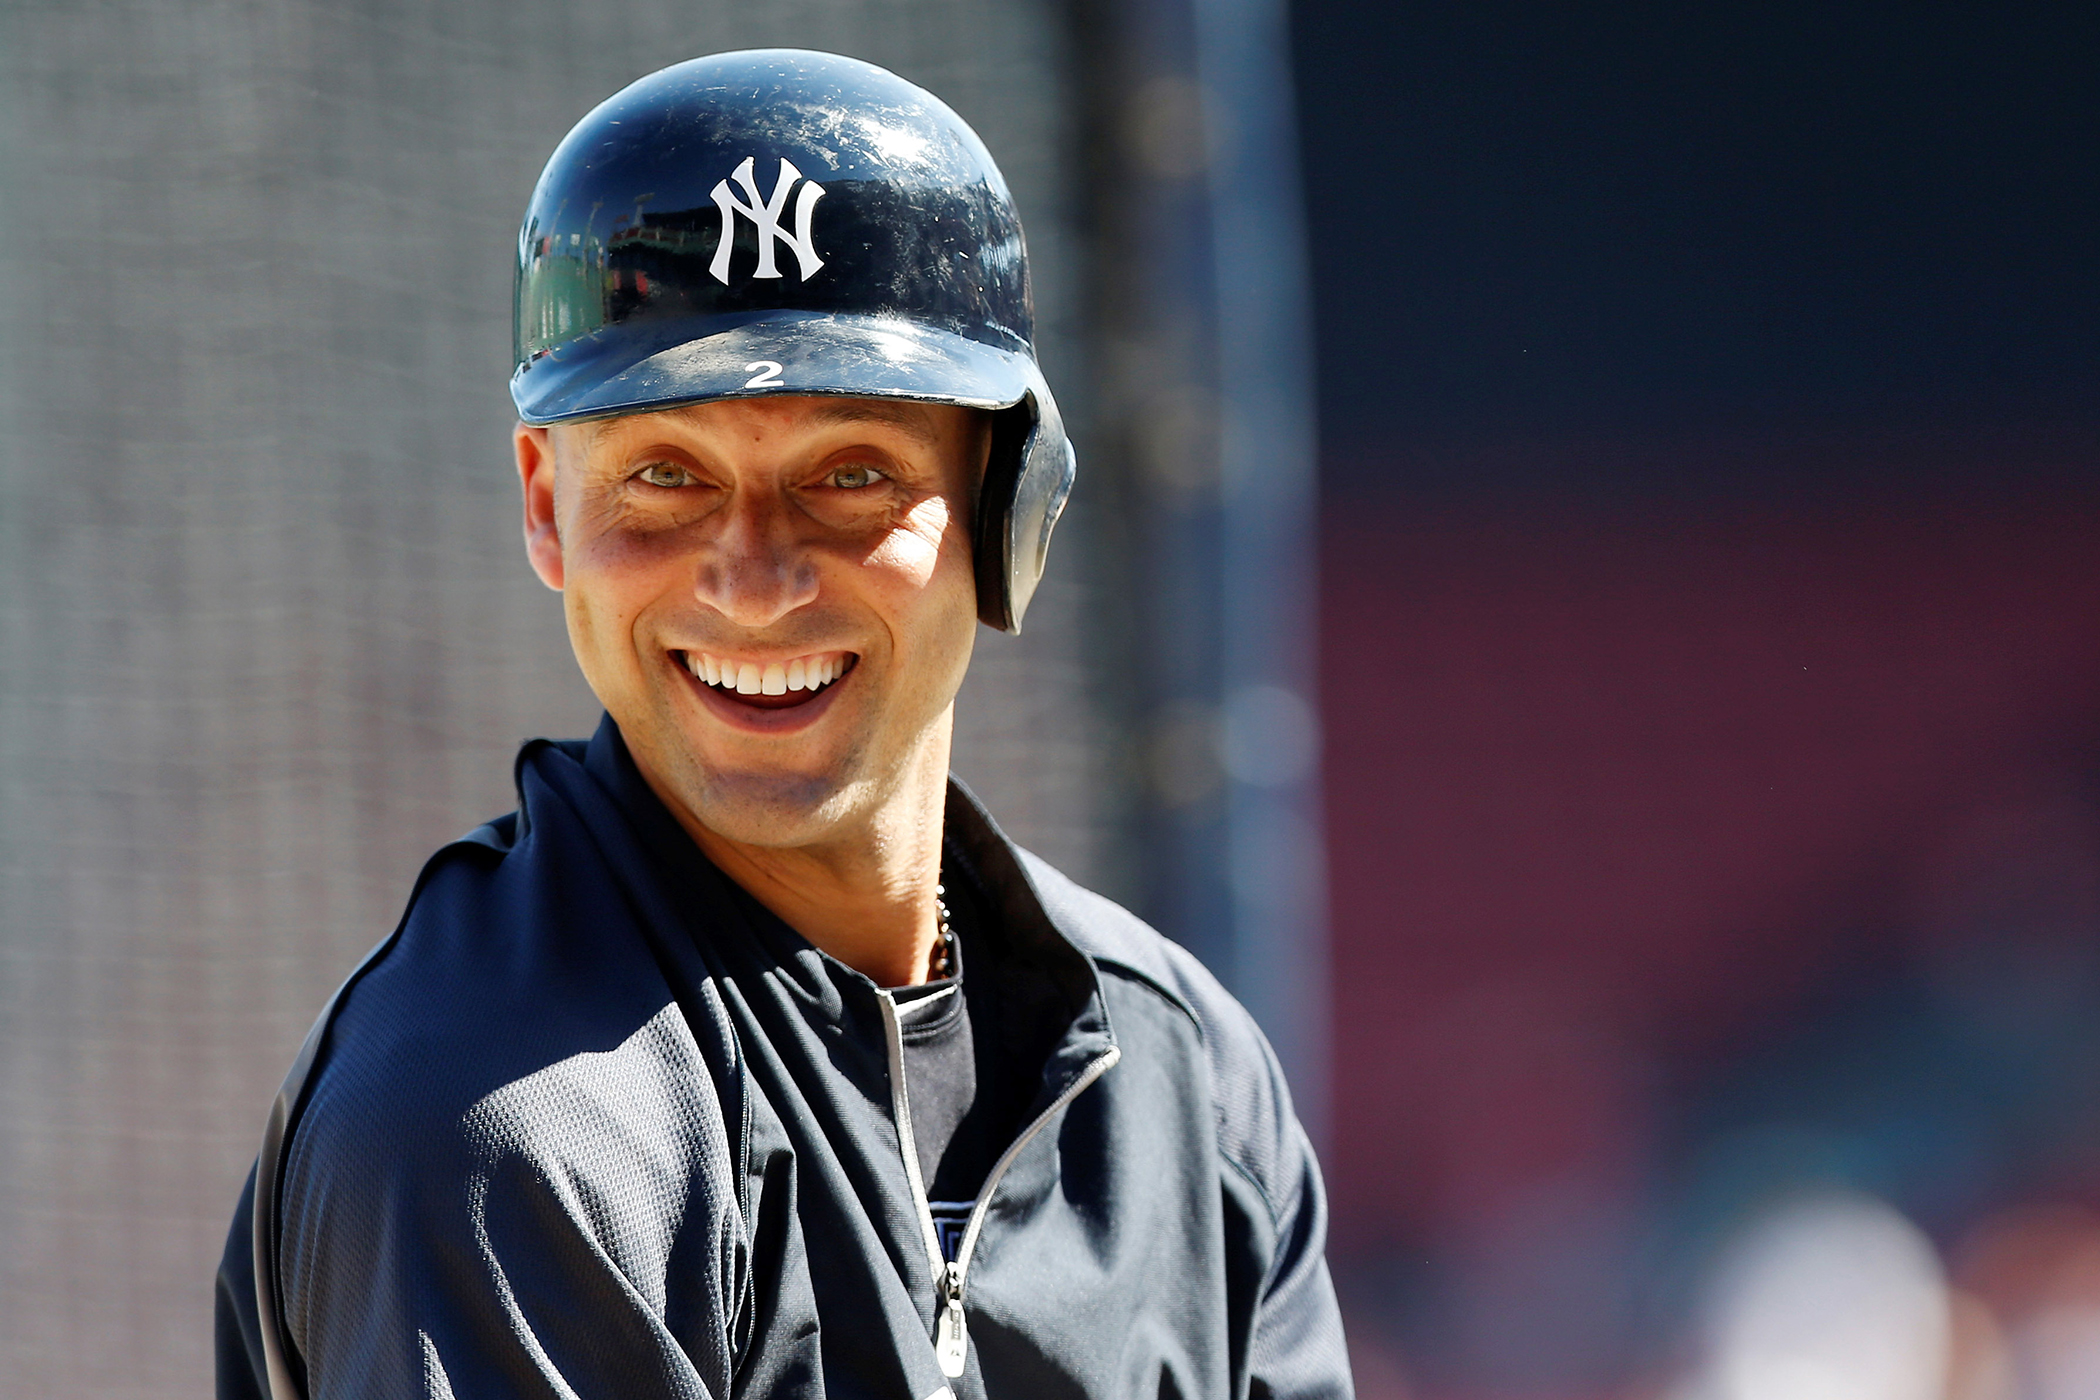 Former New York Yankees shortstop Derek Jeter (2) before the game against the Boston Red Sox at Fenway Park on Sep 28, 2014.